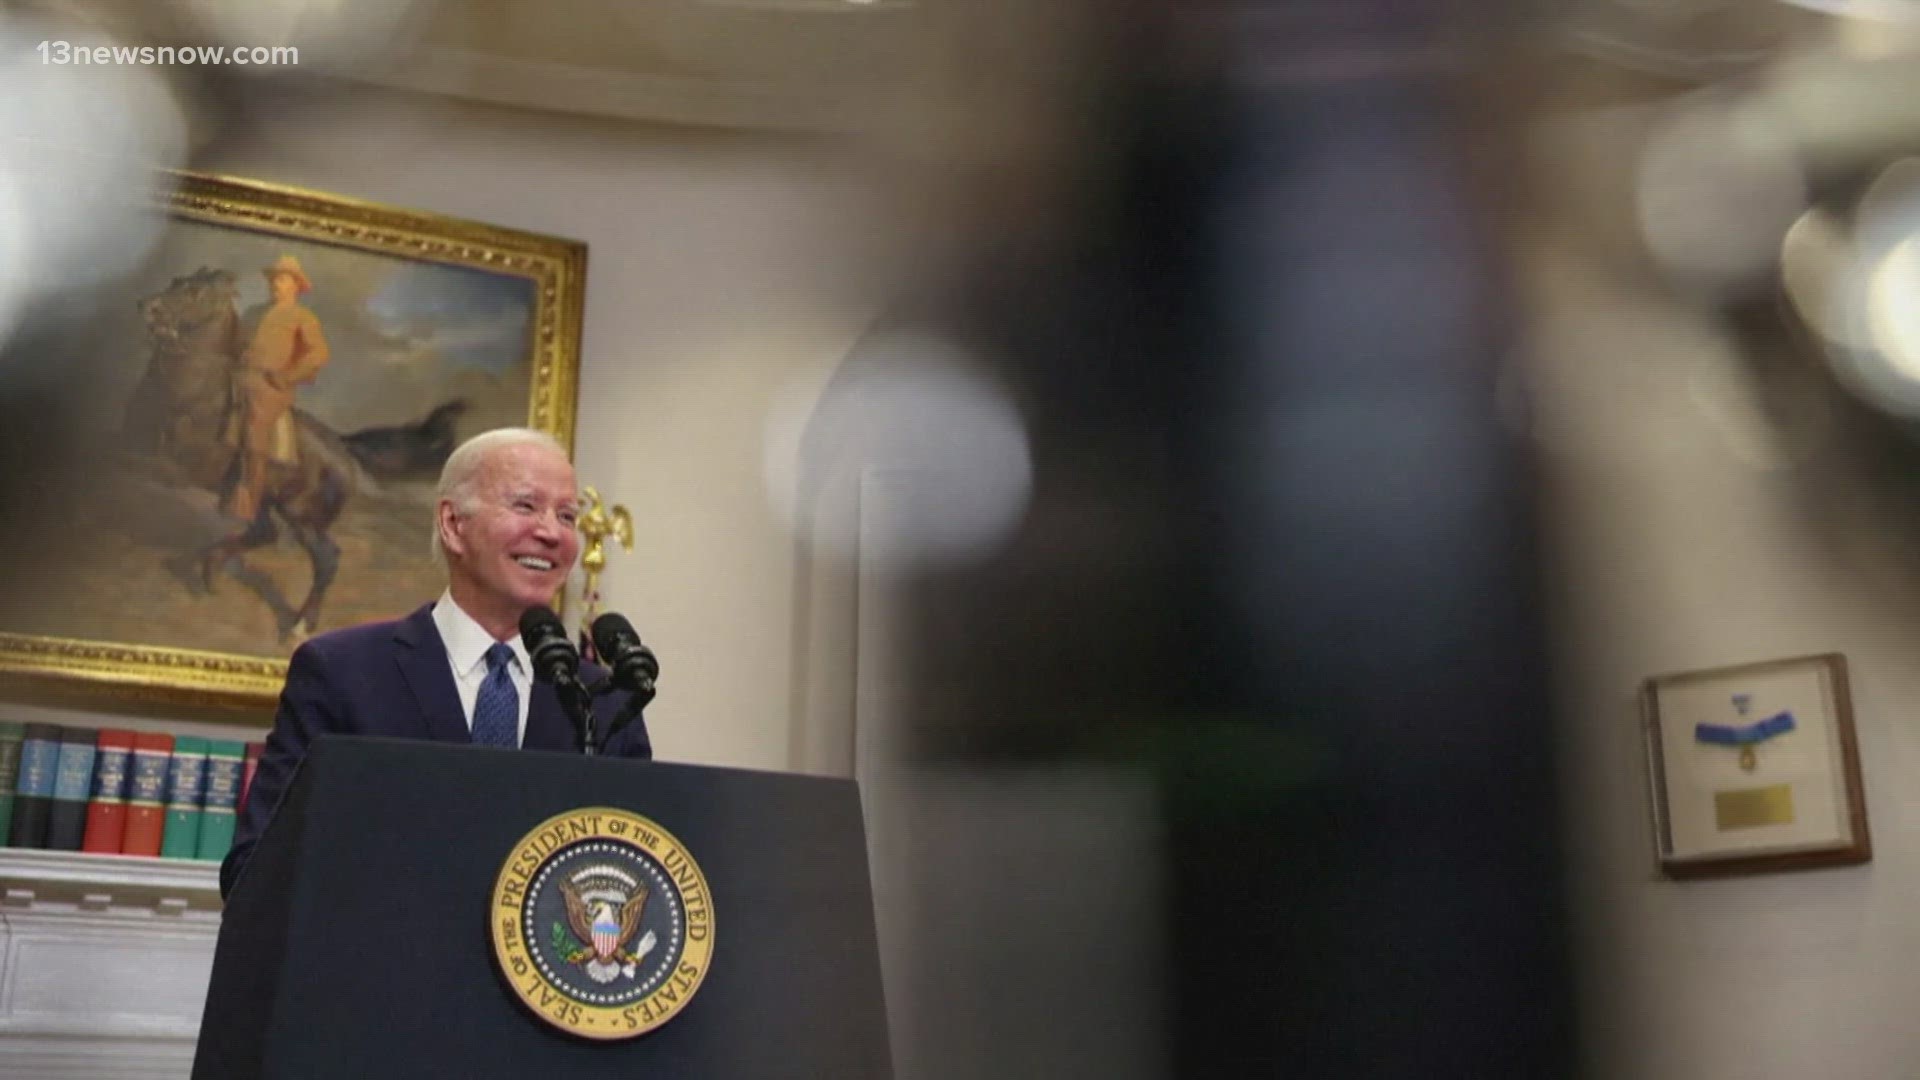 Biden's speech on Friday will be the most extended remarks from the Democratic president on the compromise.